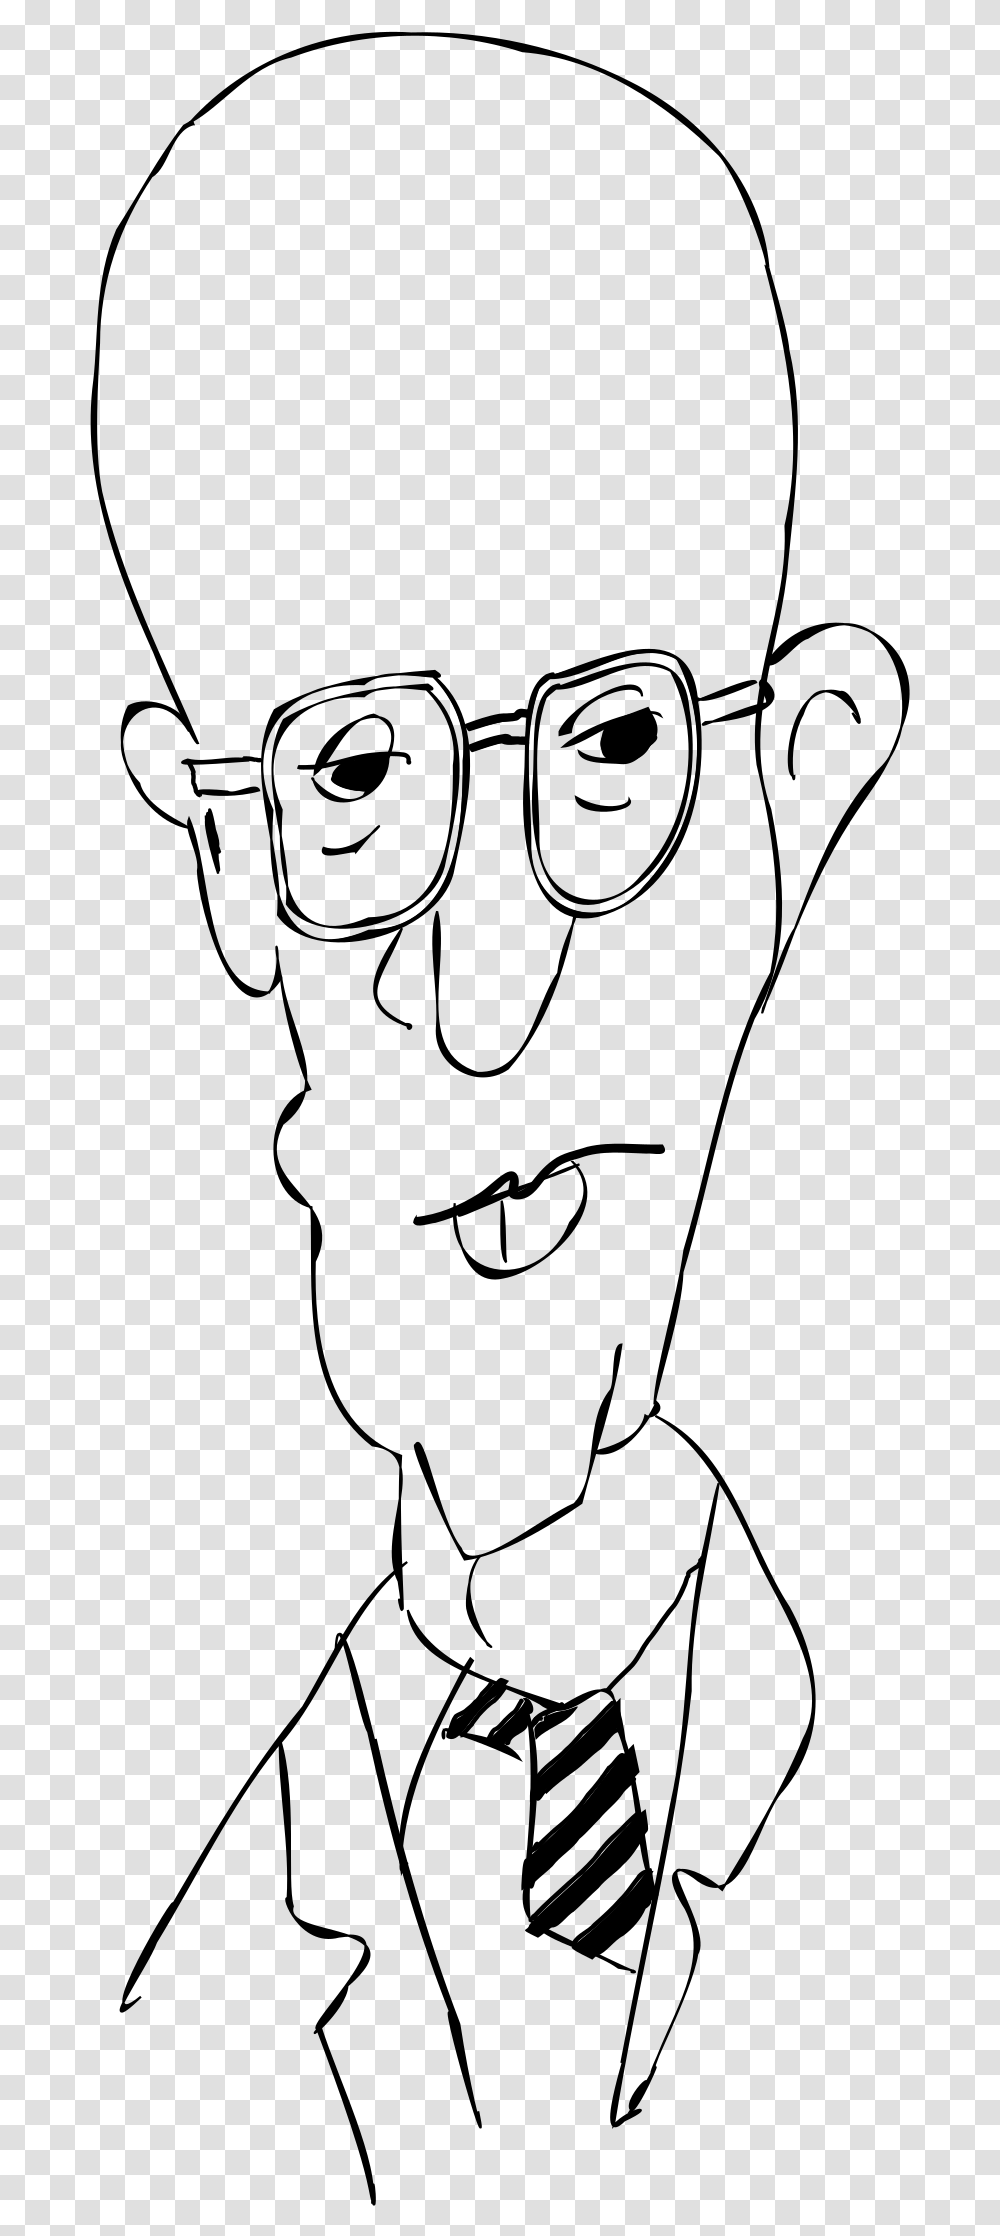 Remix Of Woody Allen Caricature Outline Clip Arts Caricature Outlines, Gray, World Of Warcraft Transparent Png